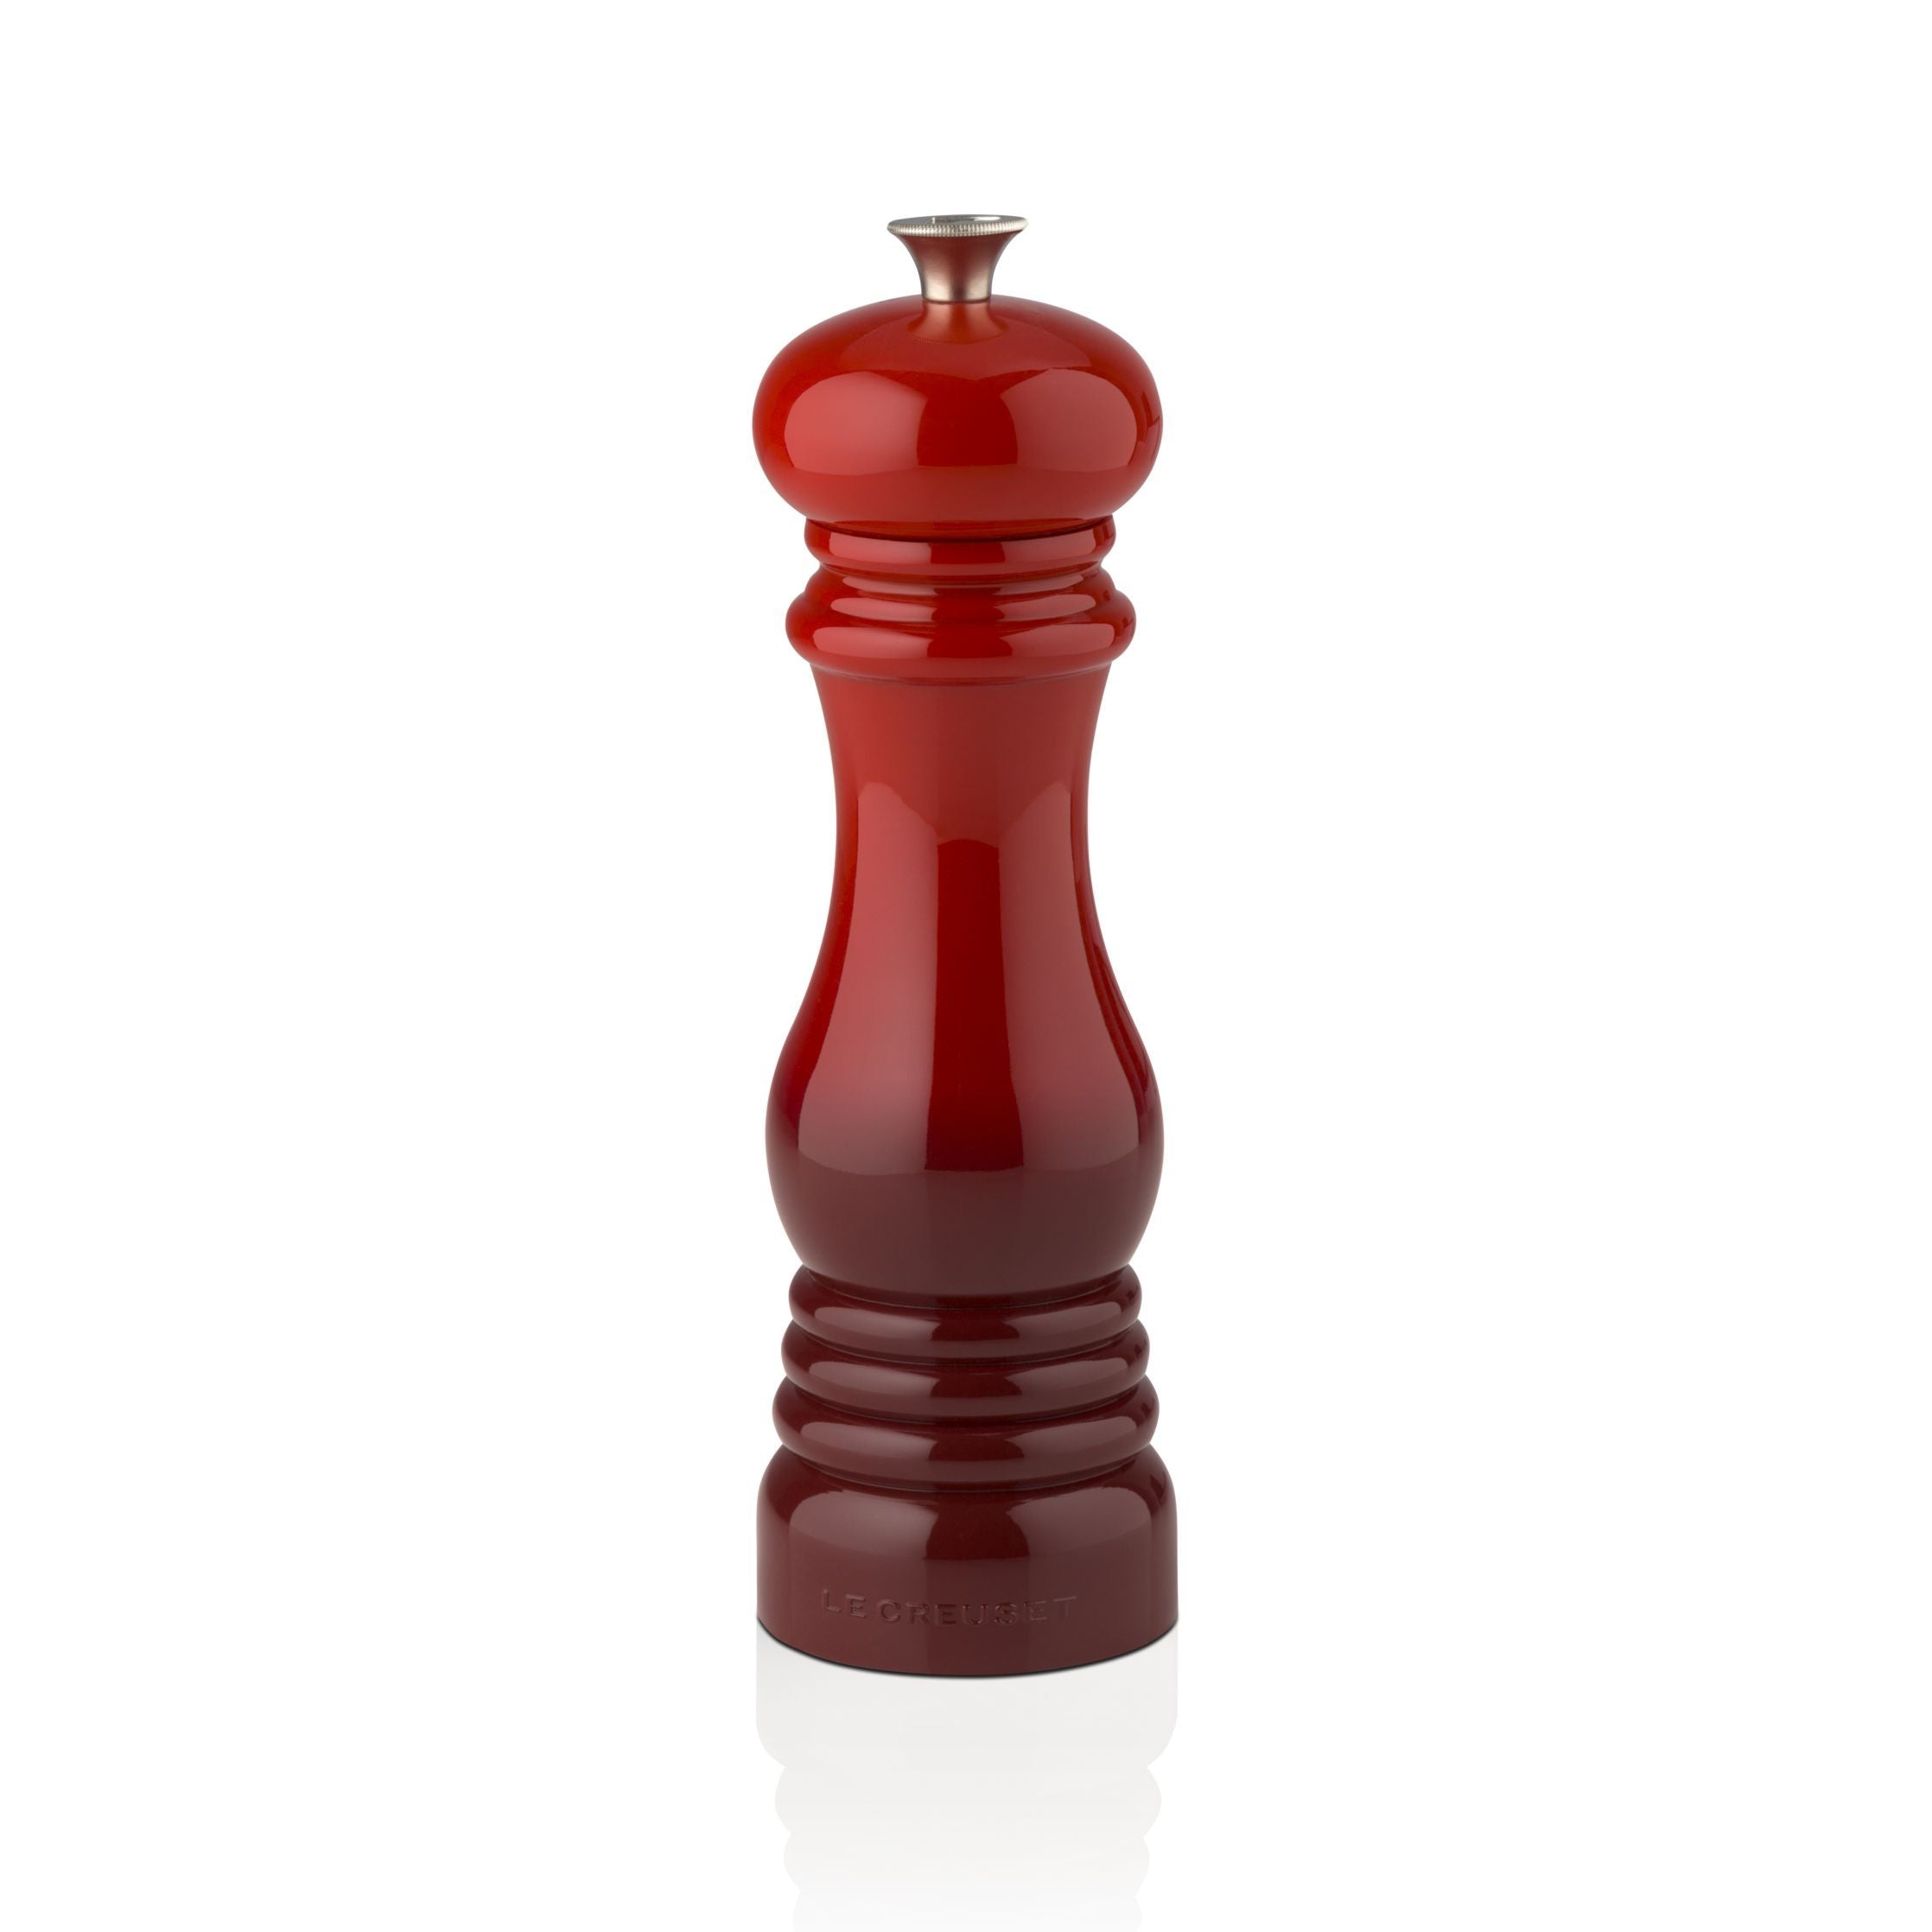 Le Creuset Pepper Mill 21 Cm, Cherry Red